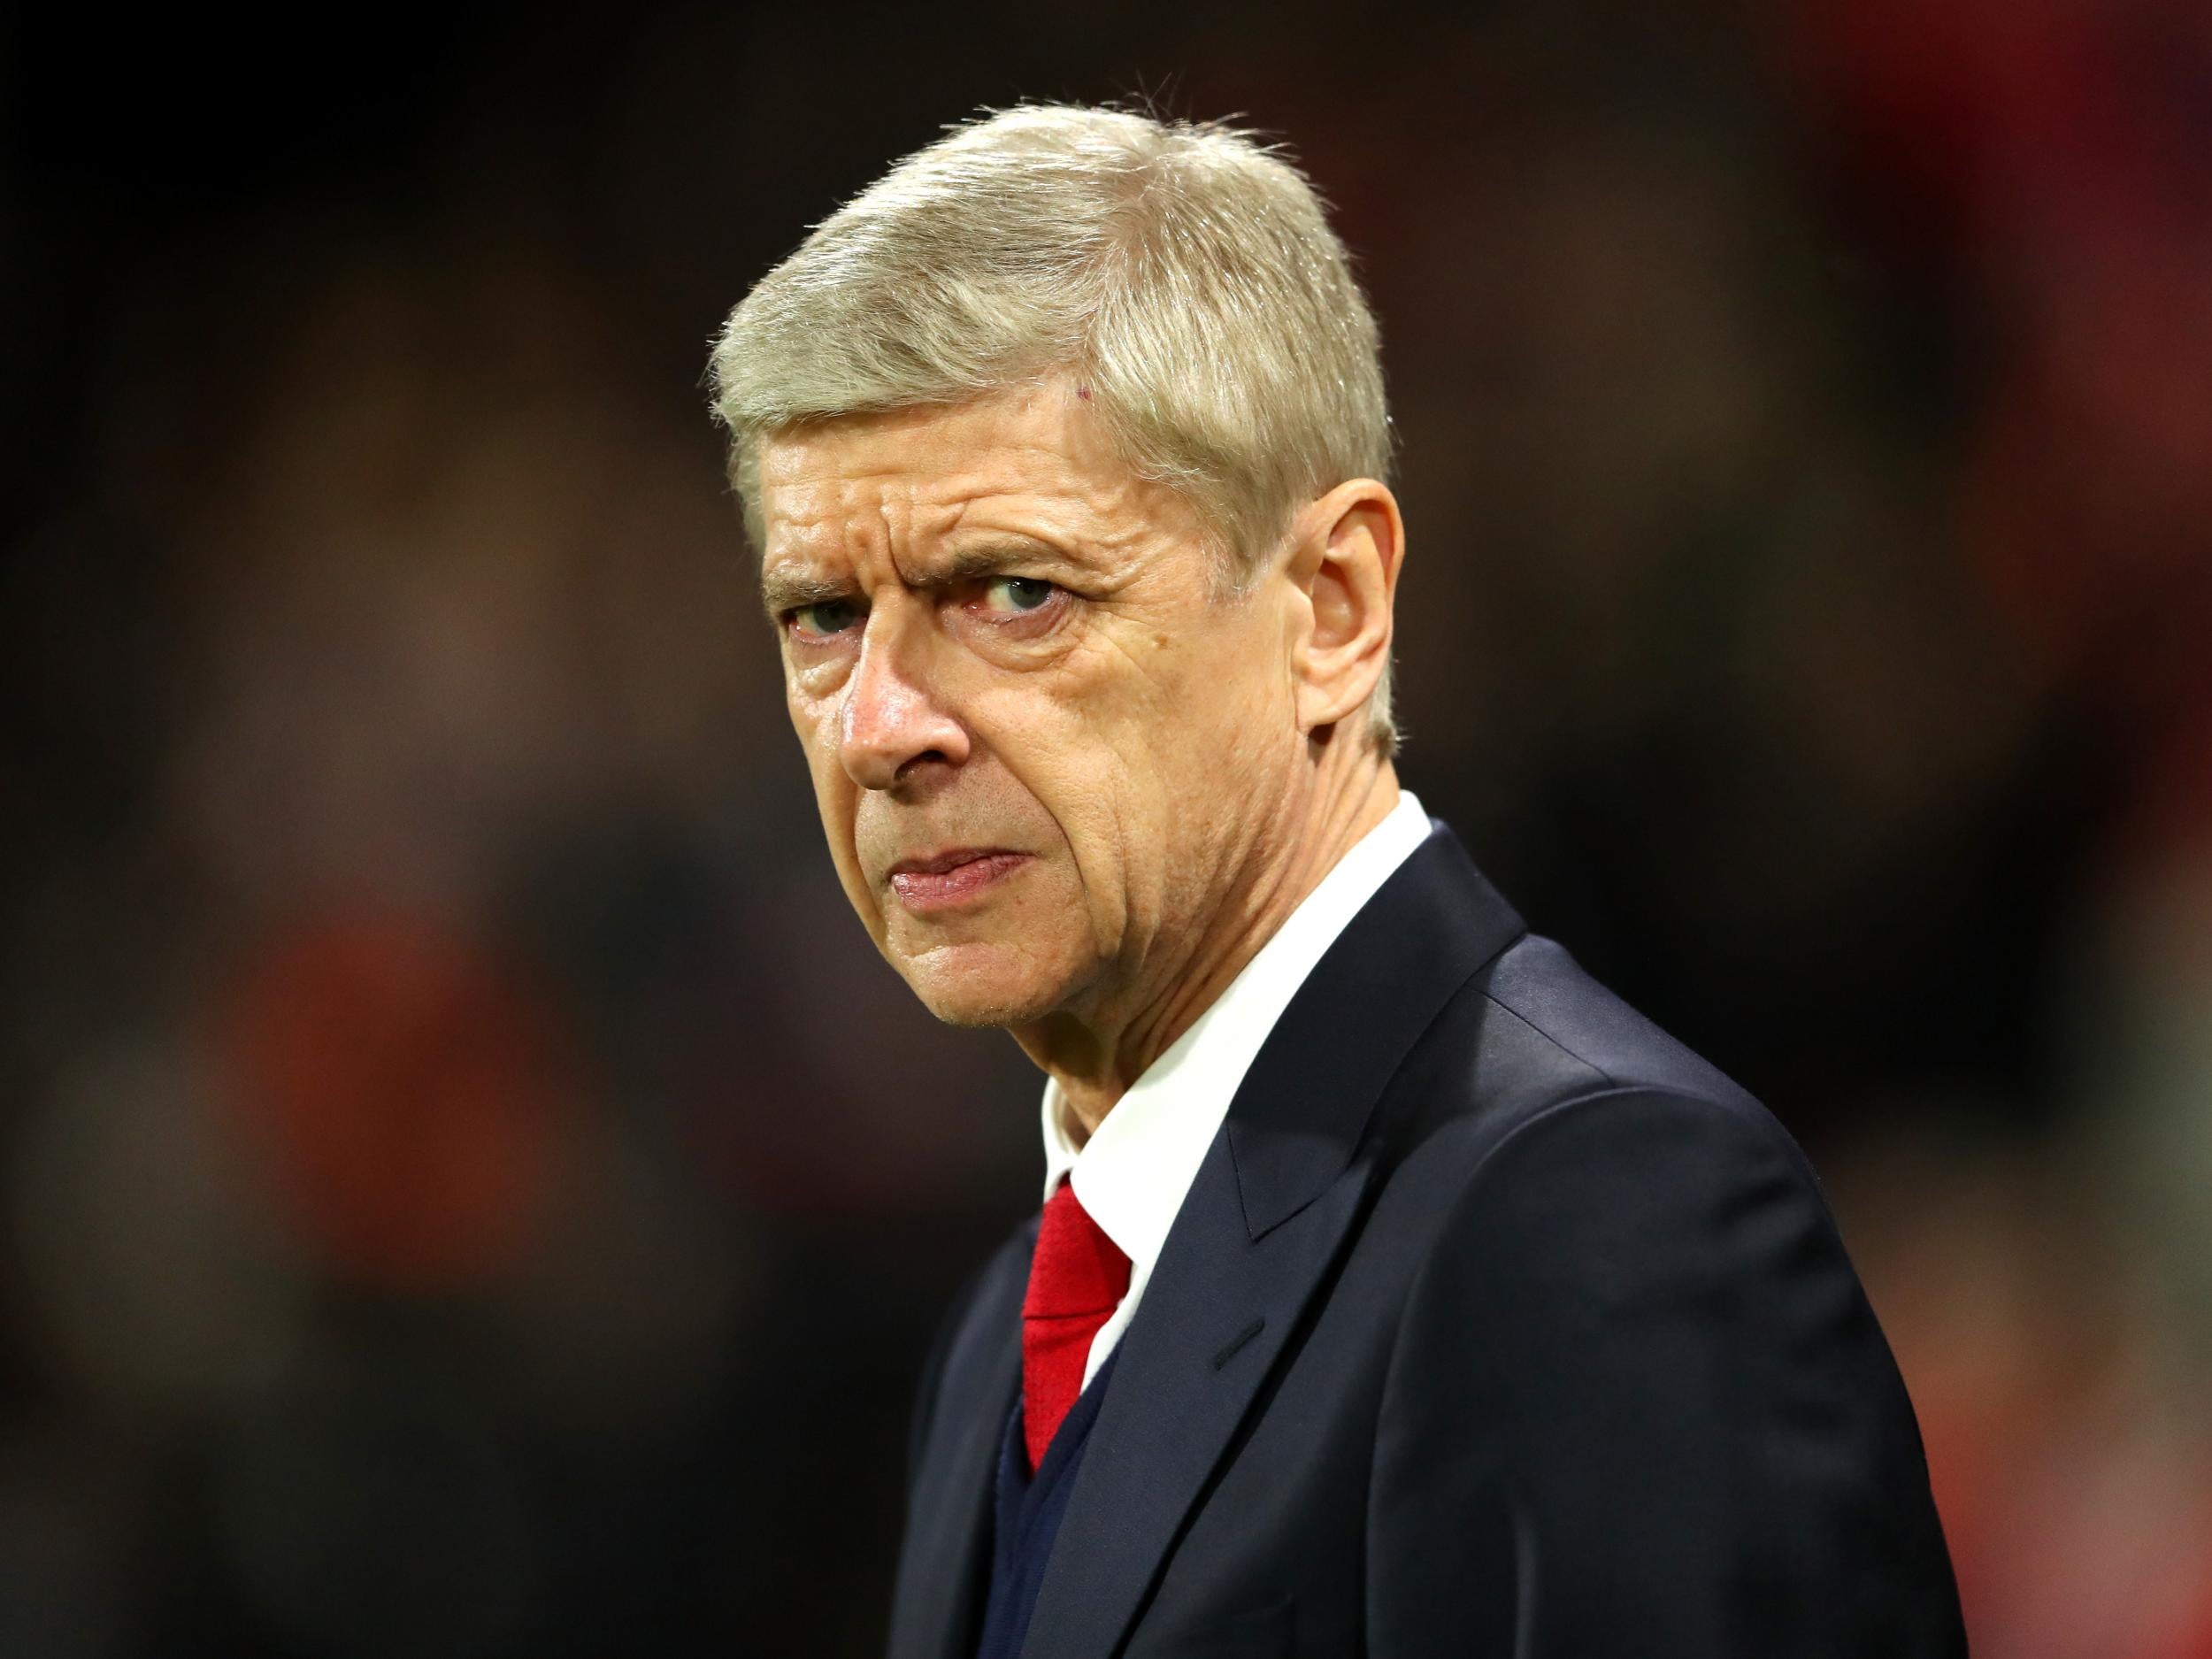 Wenger is yet to decide on his future plans